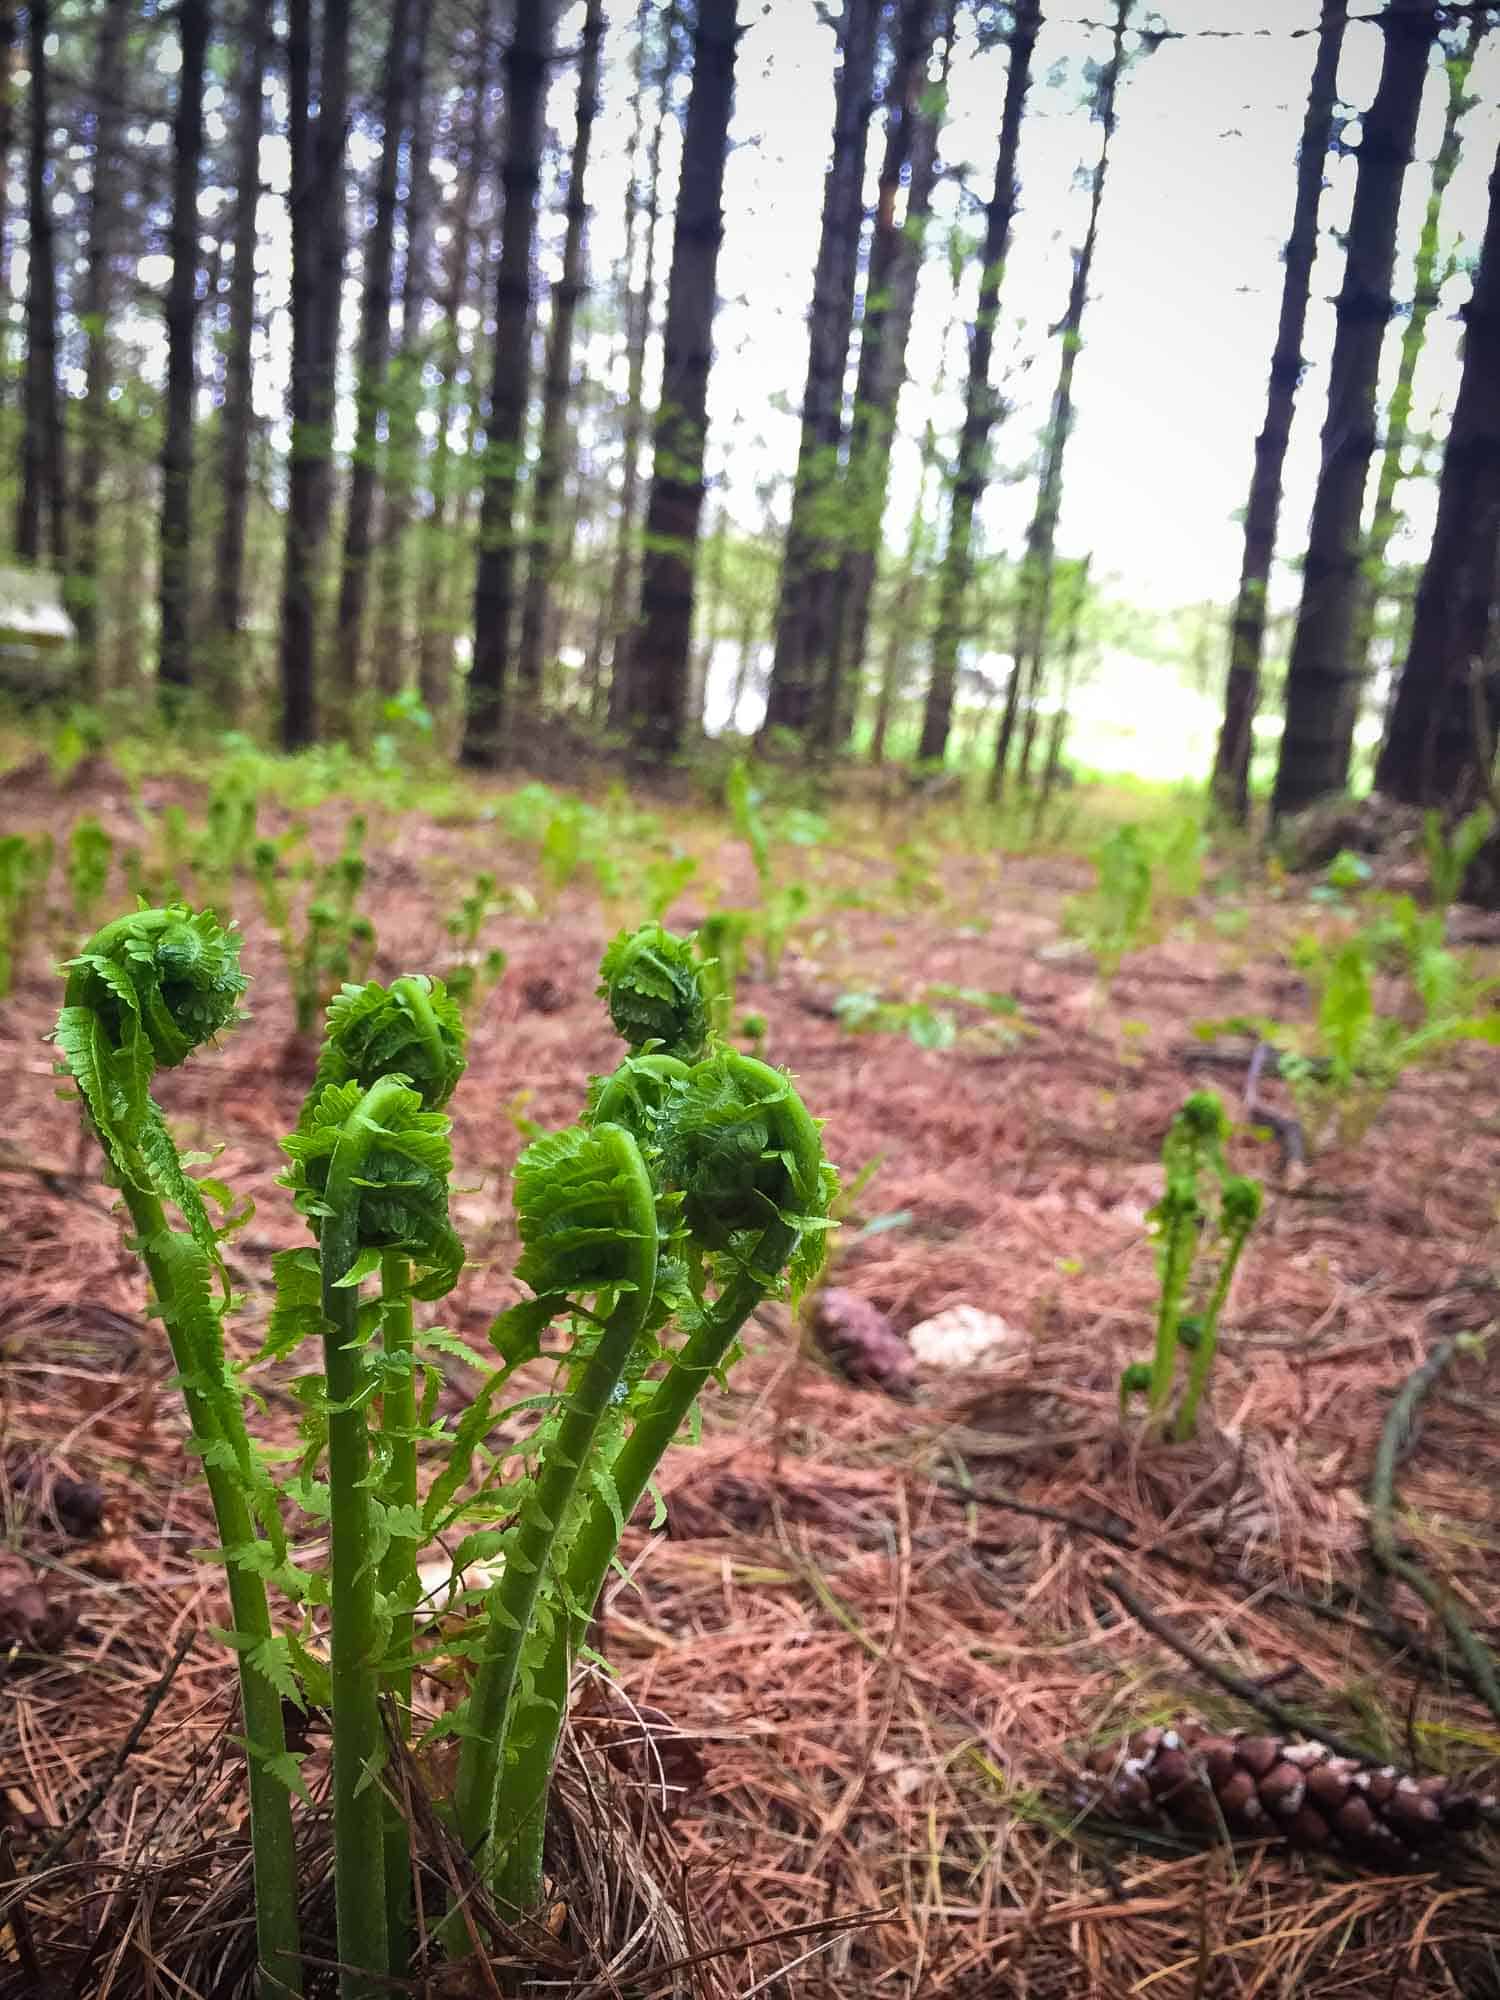 edible fiddlehead ferns growing in the forest in Ontario